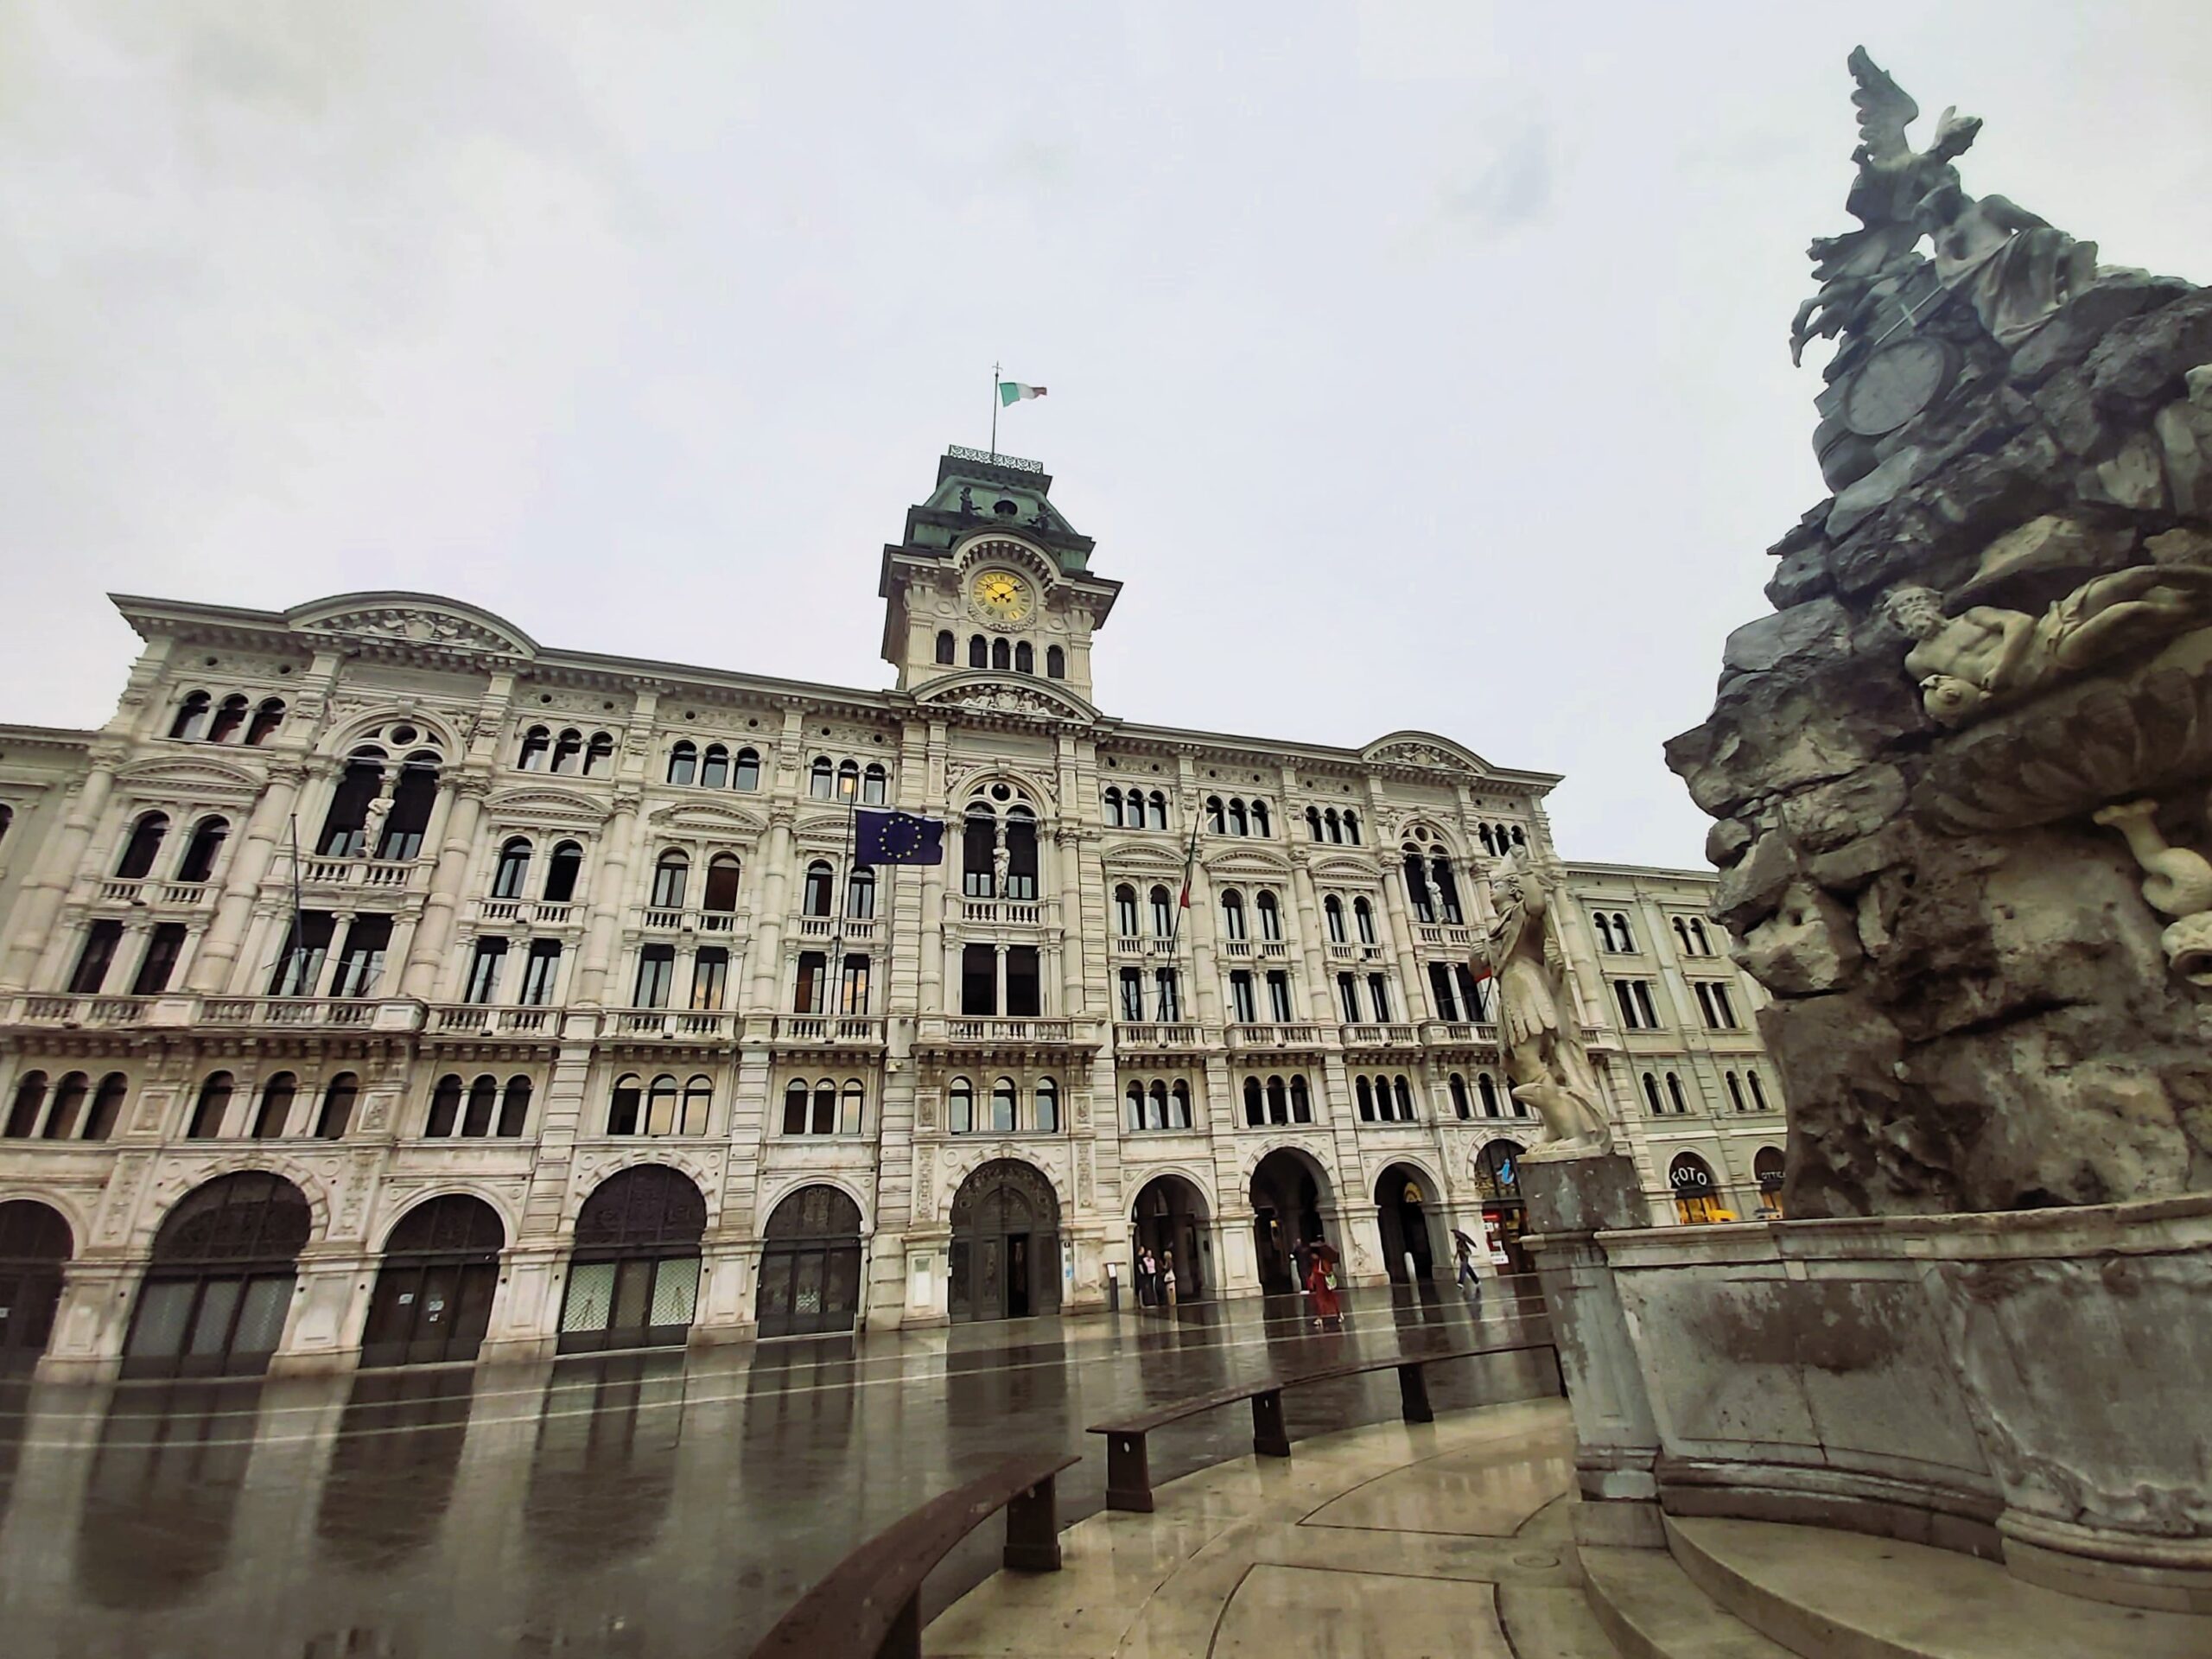 The main square in Trieste, Italy